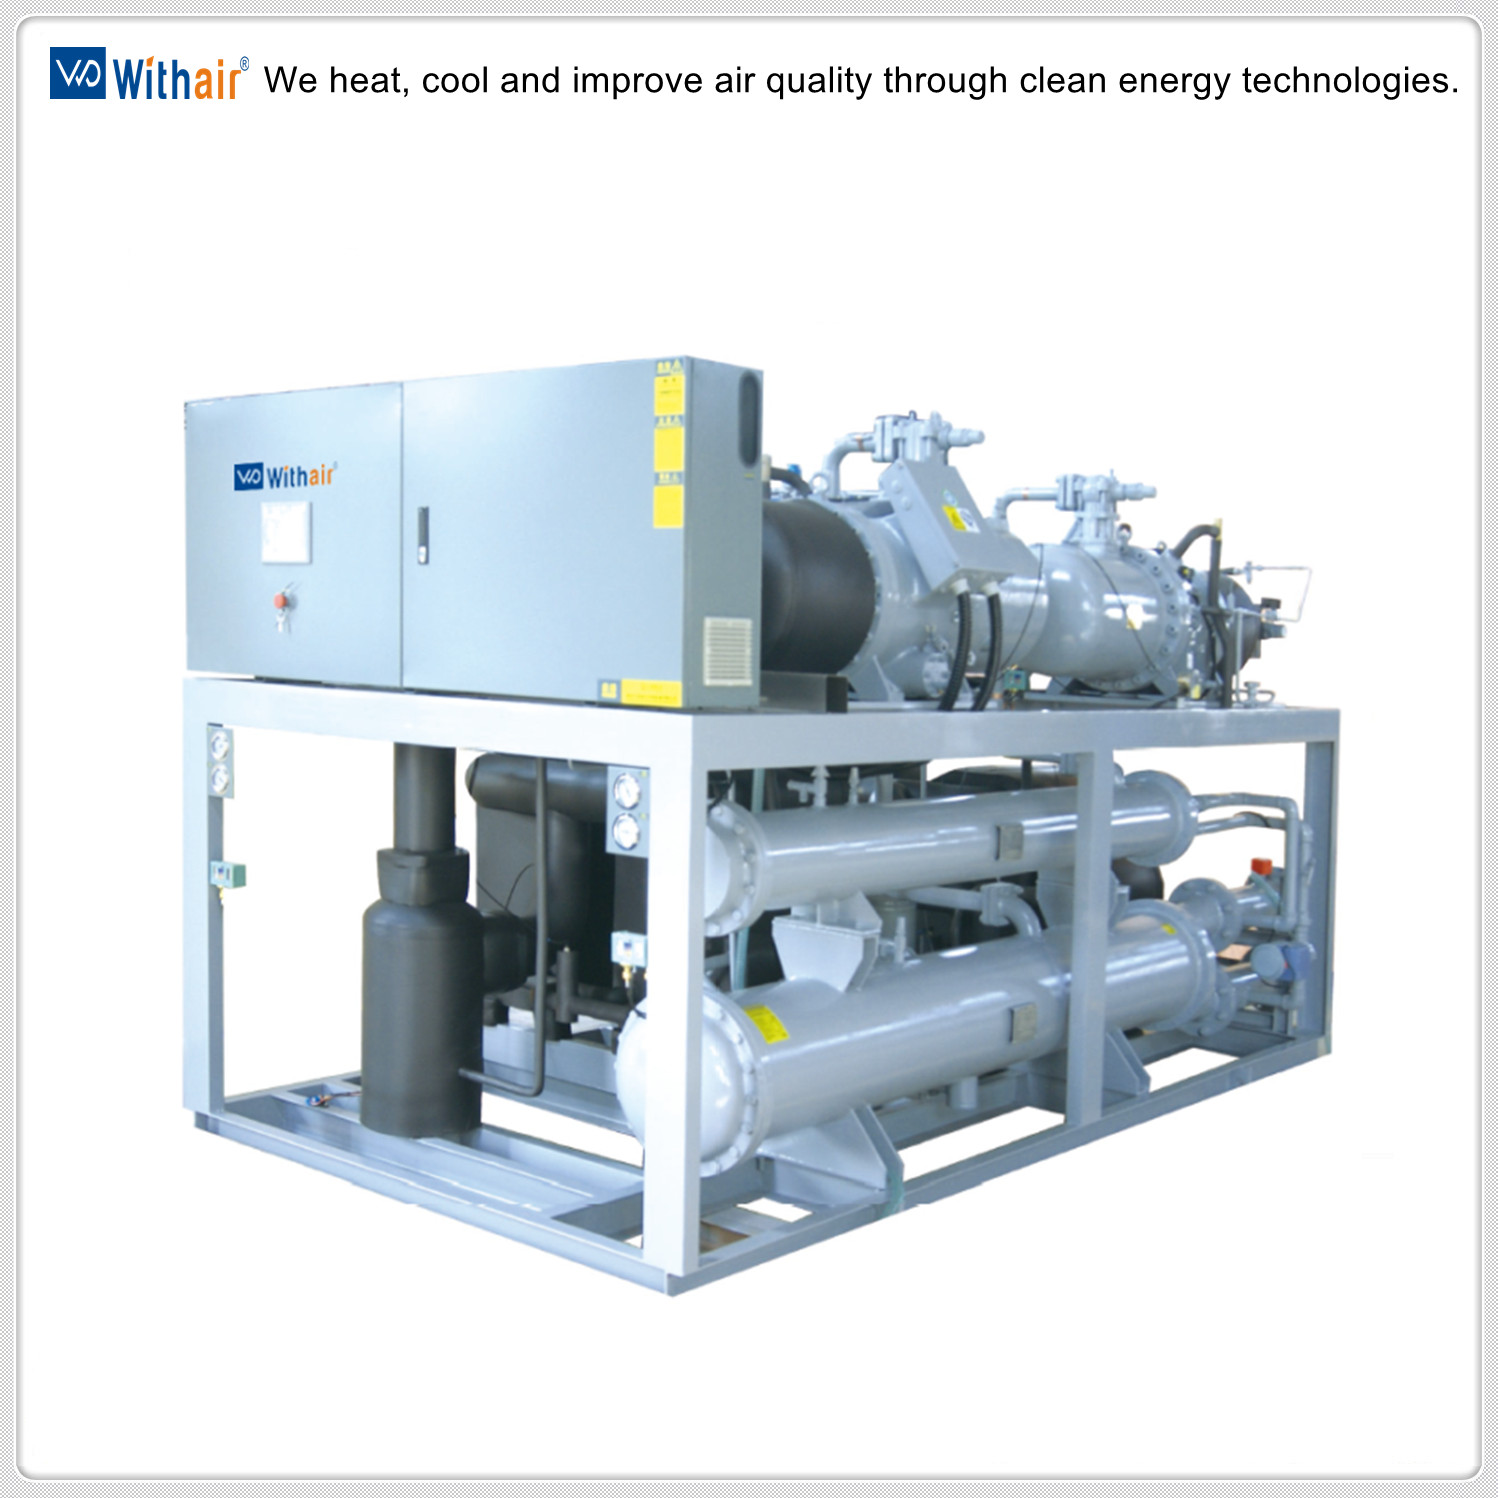 Water-Cooled Screw Chillers (Medium and Low Temperature)